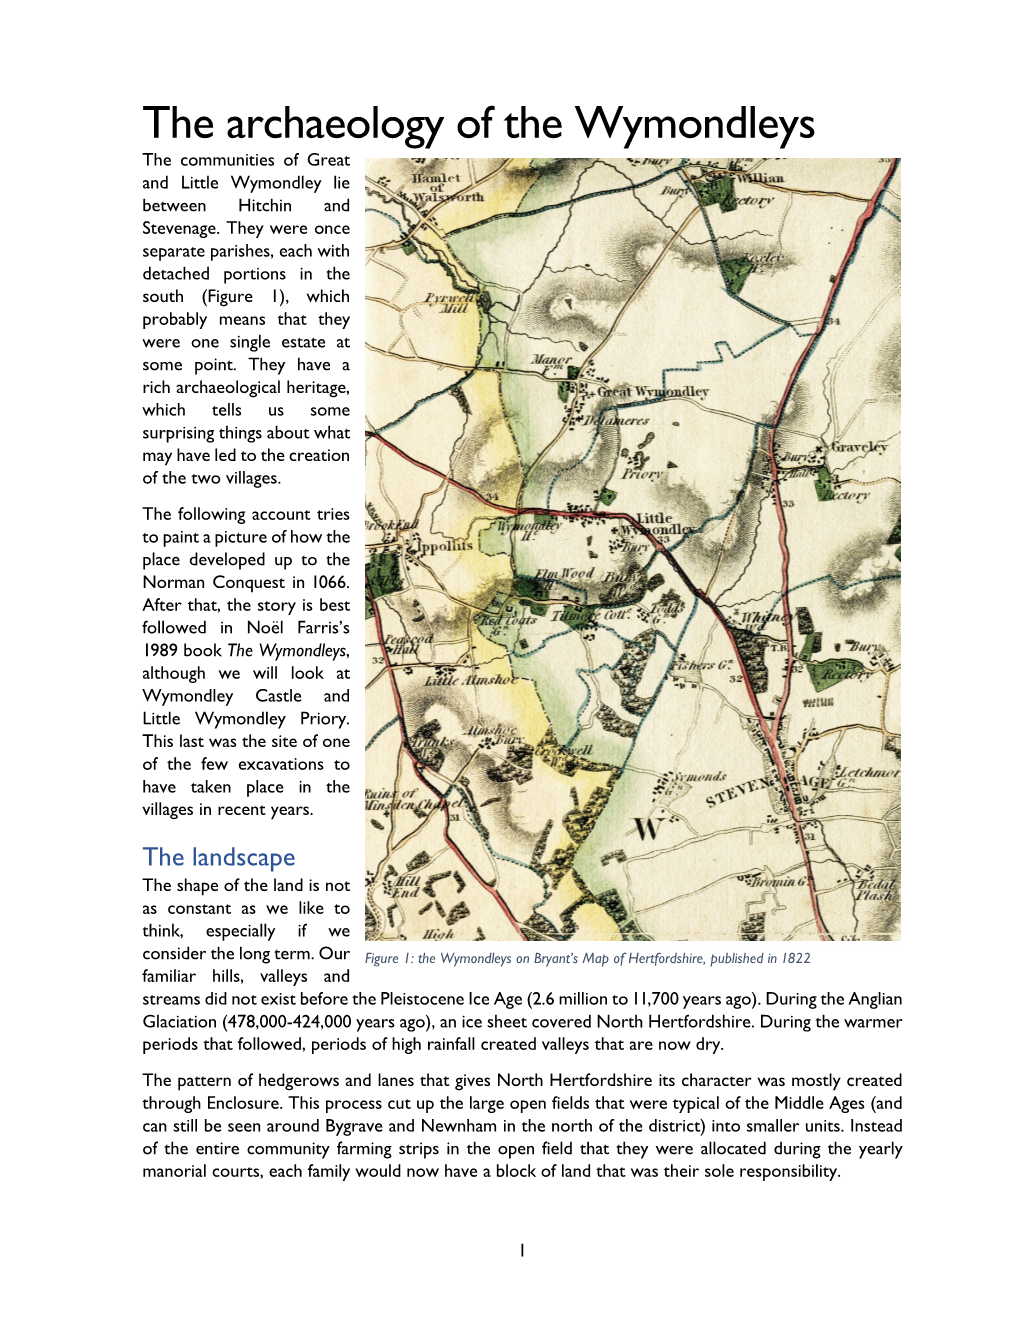 The Archaeology of the Wymondleys the Communities of Great and Little Wymondley Lie Between Hitchin and Stevenage